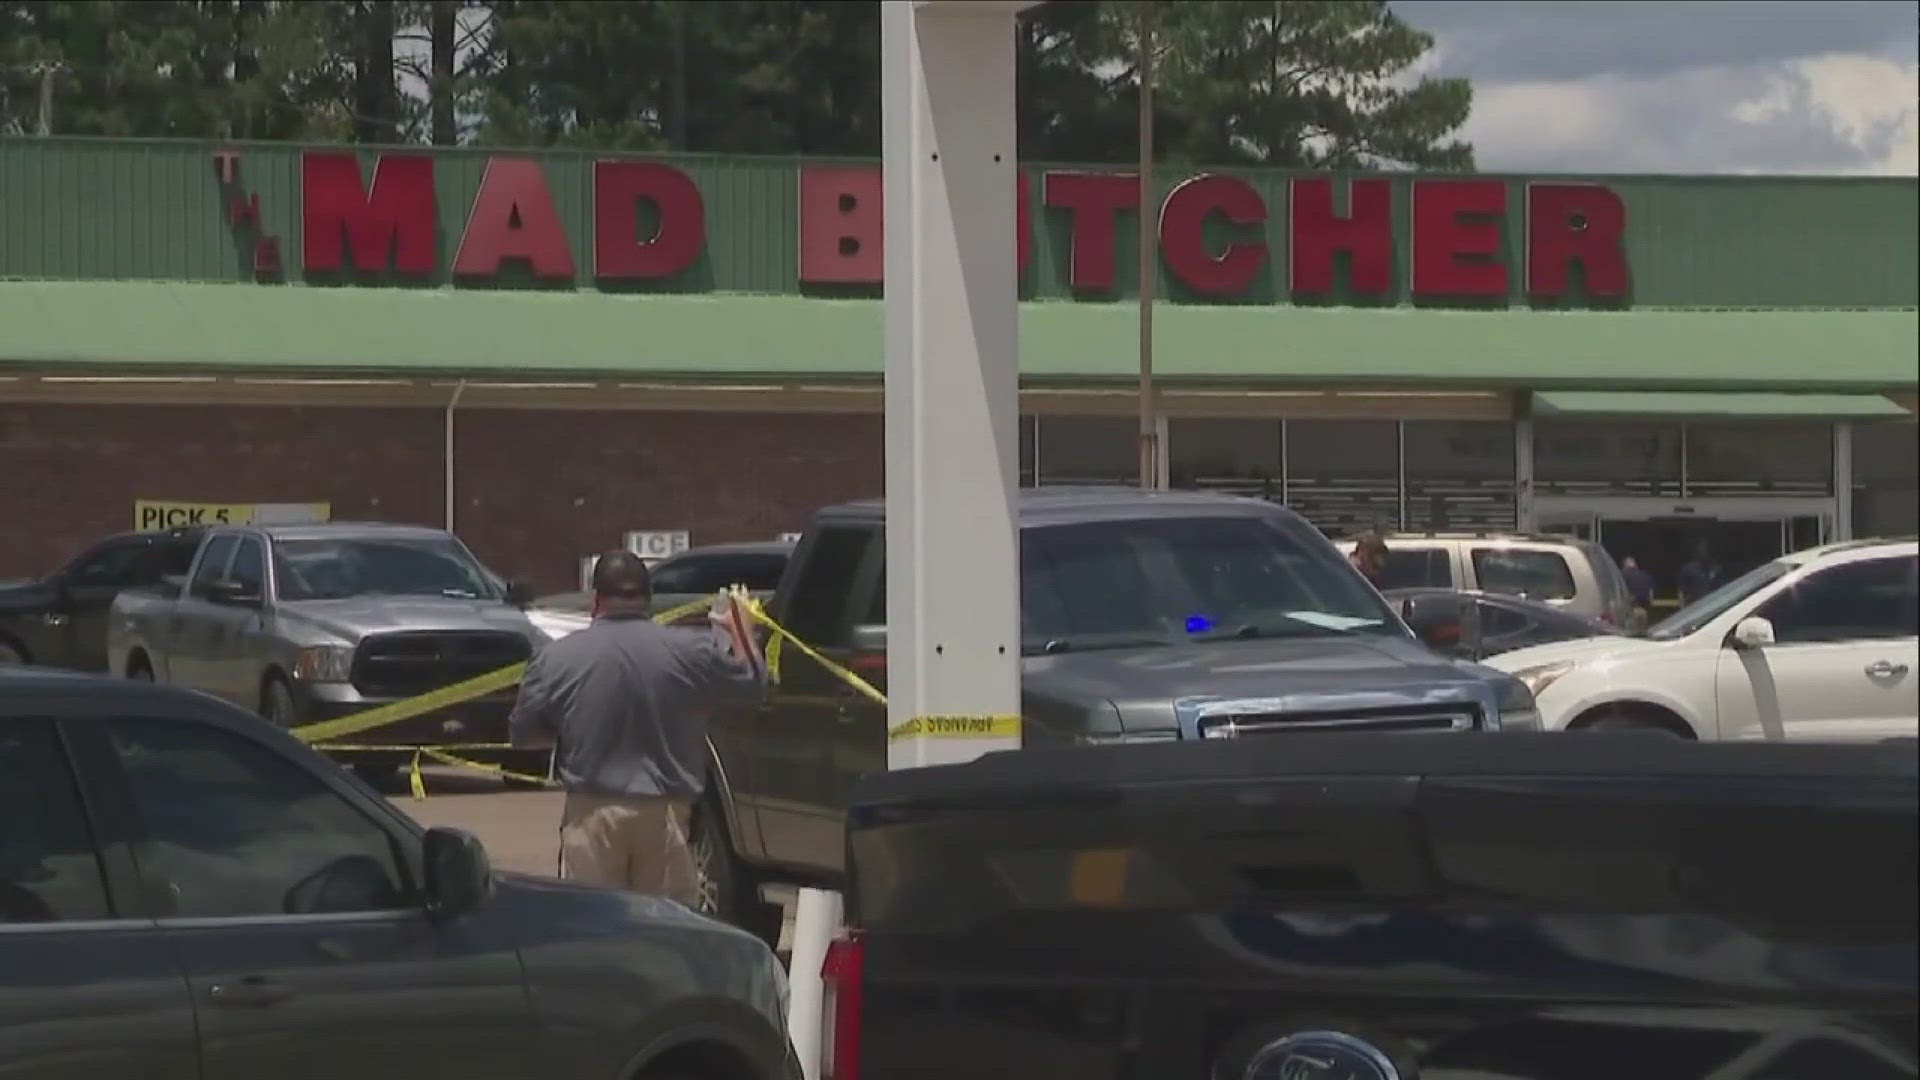 Three people are dead and multiple people injured in a mass shooting at a grocery store.